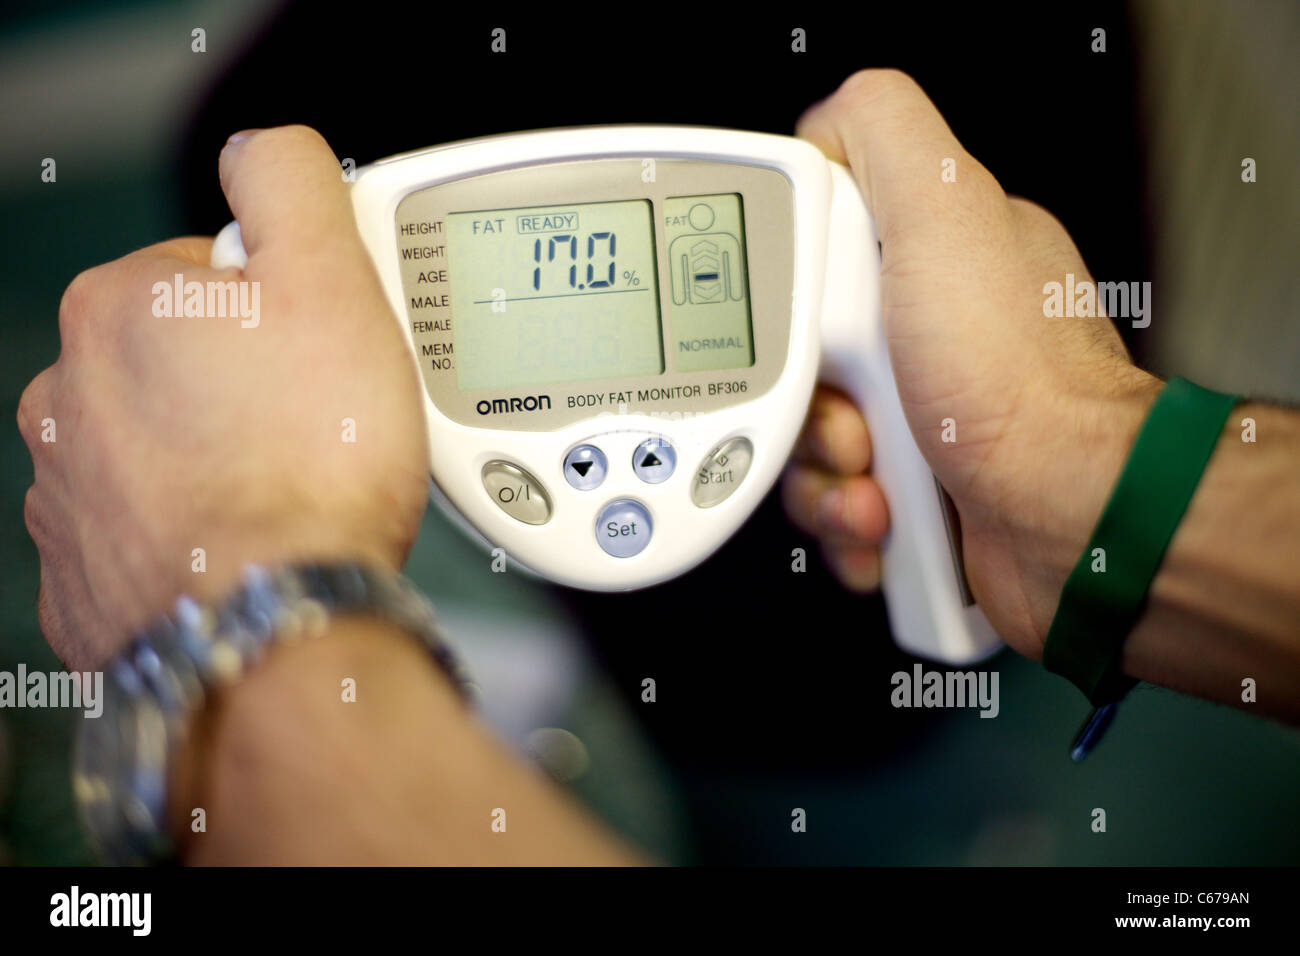 Hands holding an Omron Body Fat Monitor BF306 Stock Photo - Alamy